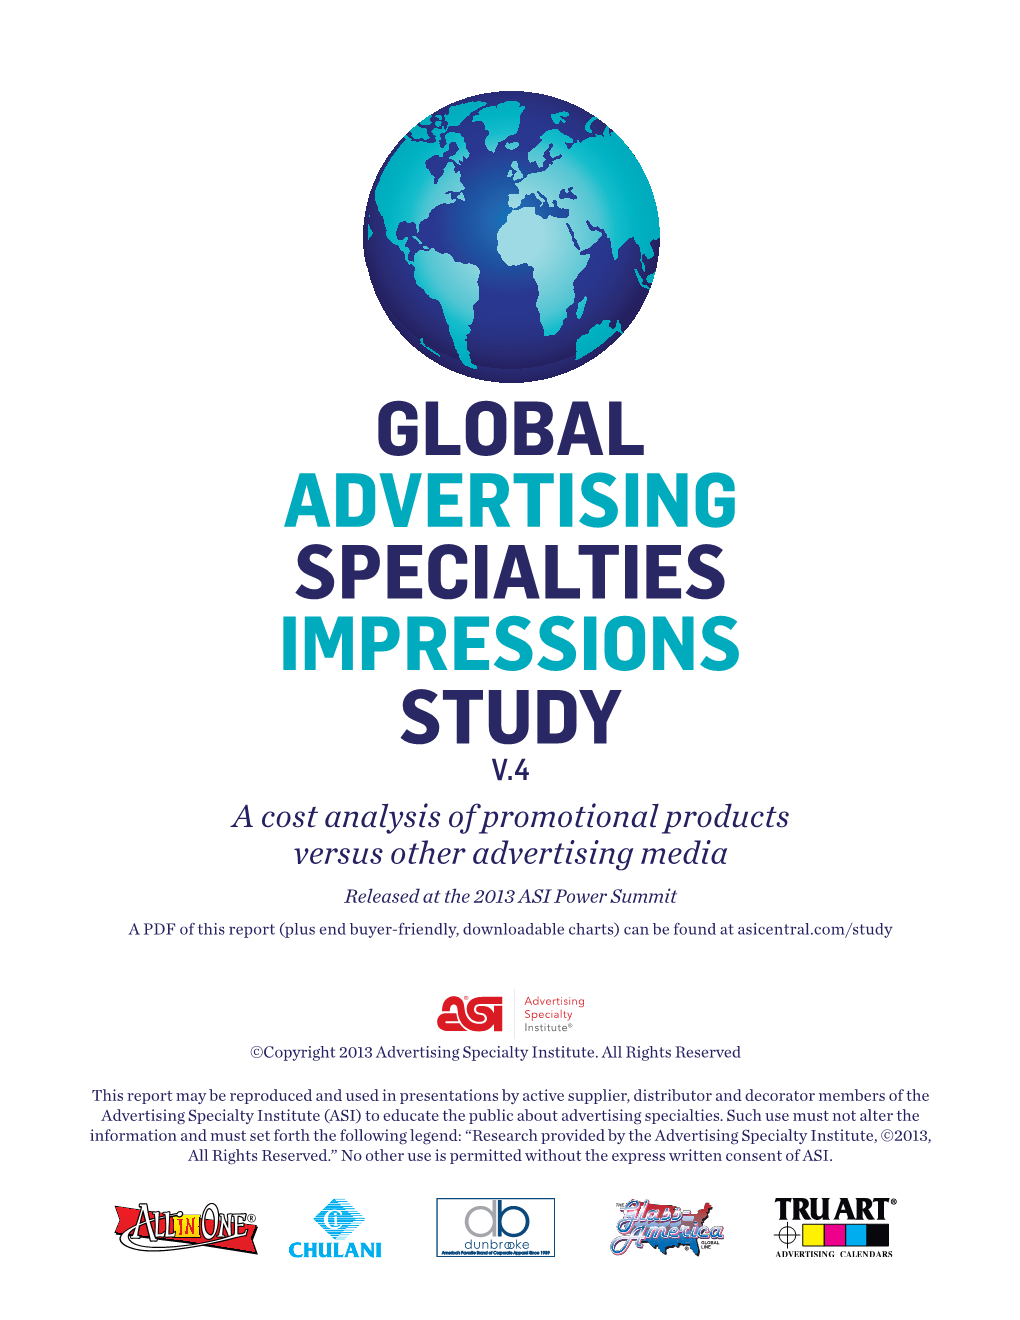 Global Advertising Specialties Impressions Study V.4